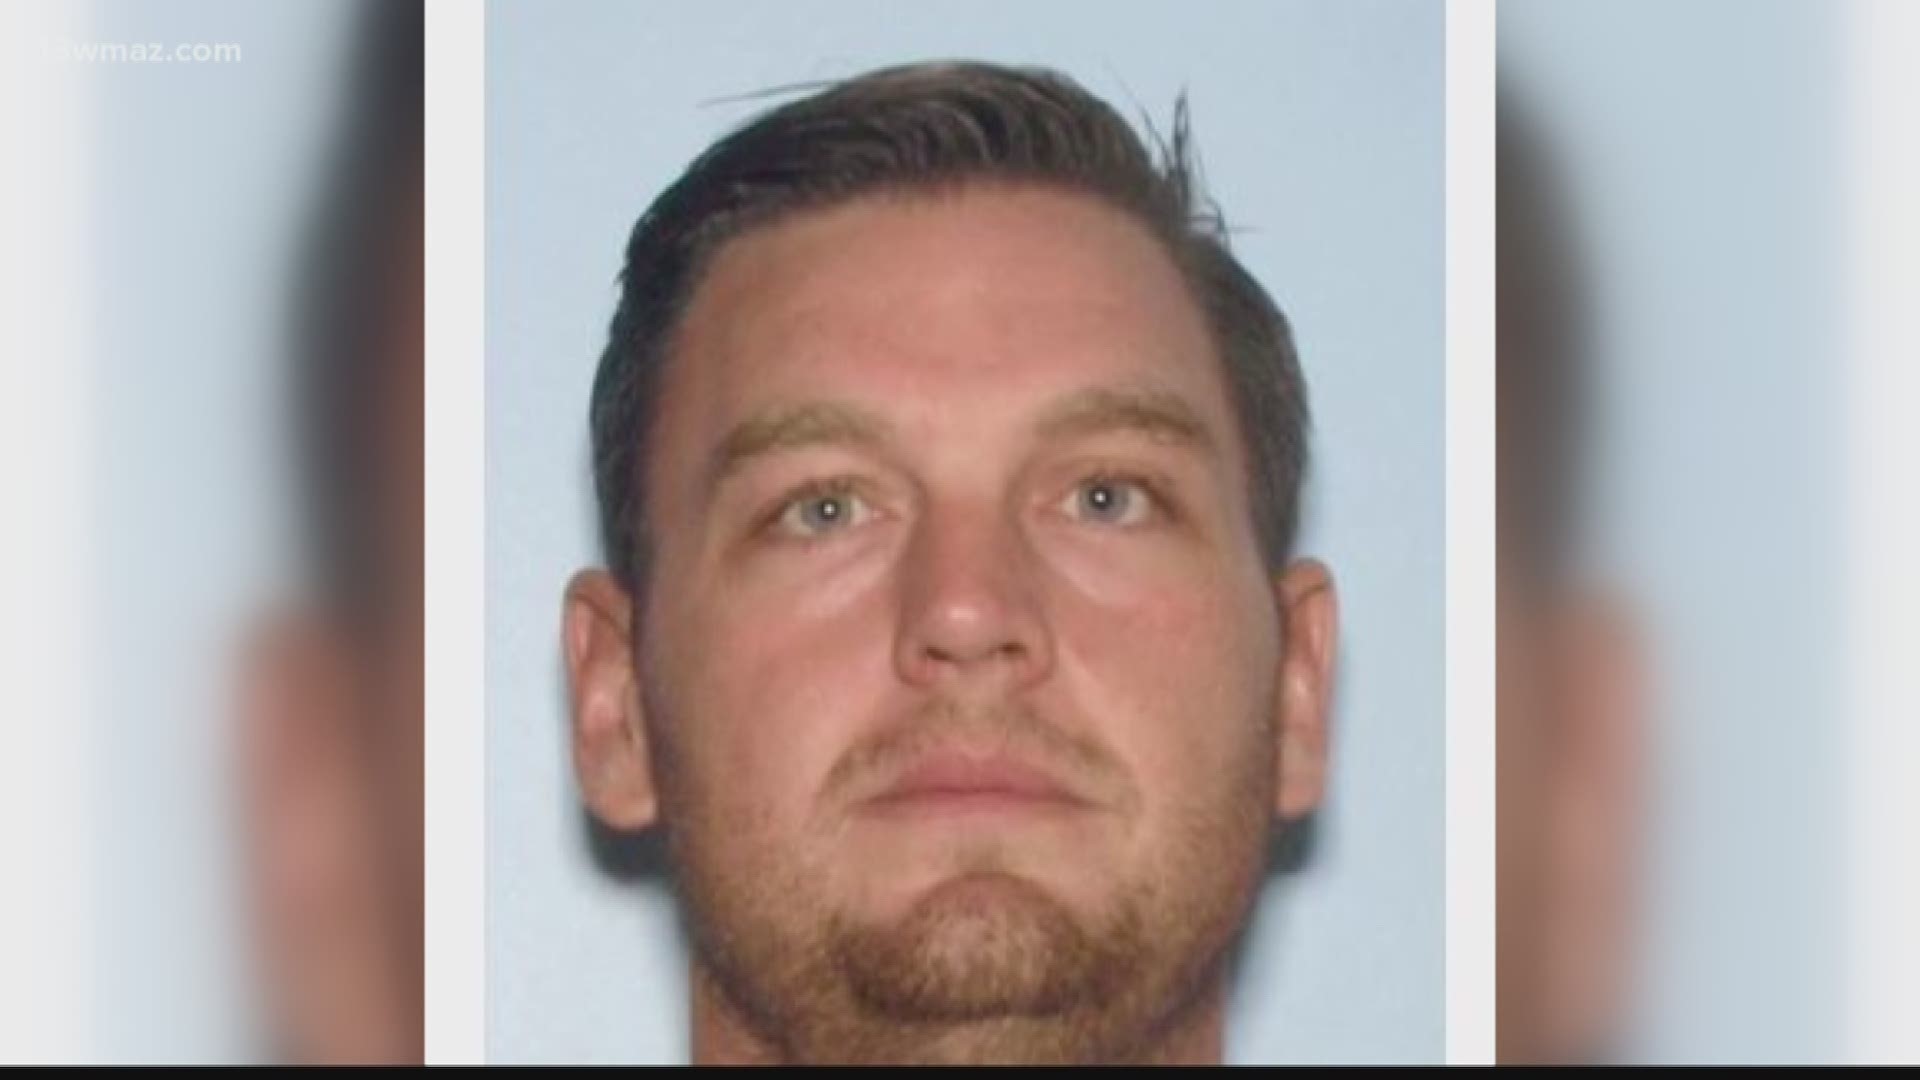 Dukes was located at a family member's house in Irwin County.